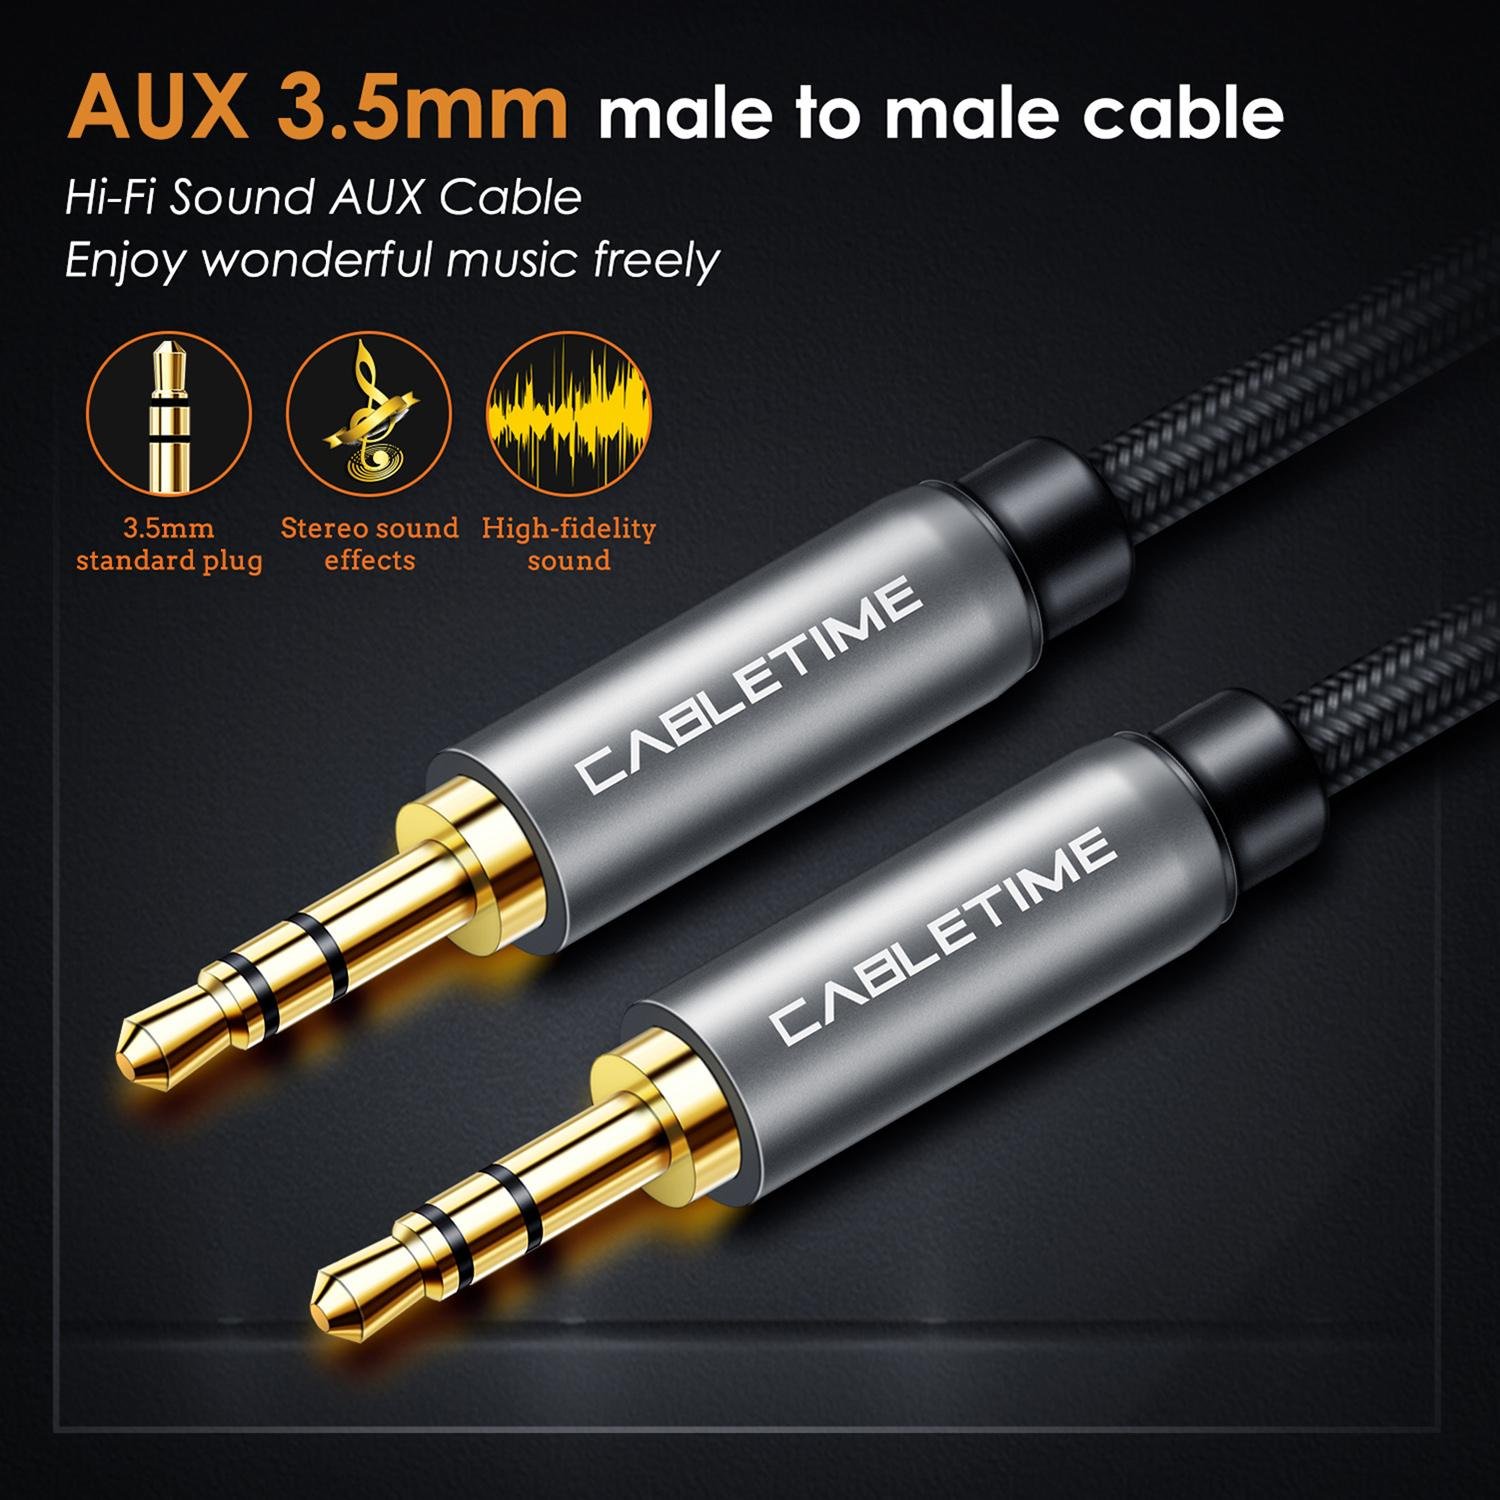 CABLETIME Premium AUX Audio Cable Stereo 3.5mm Male to Male, Full Copper 1